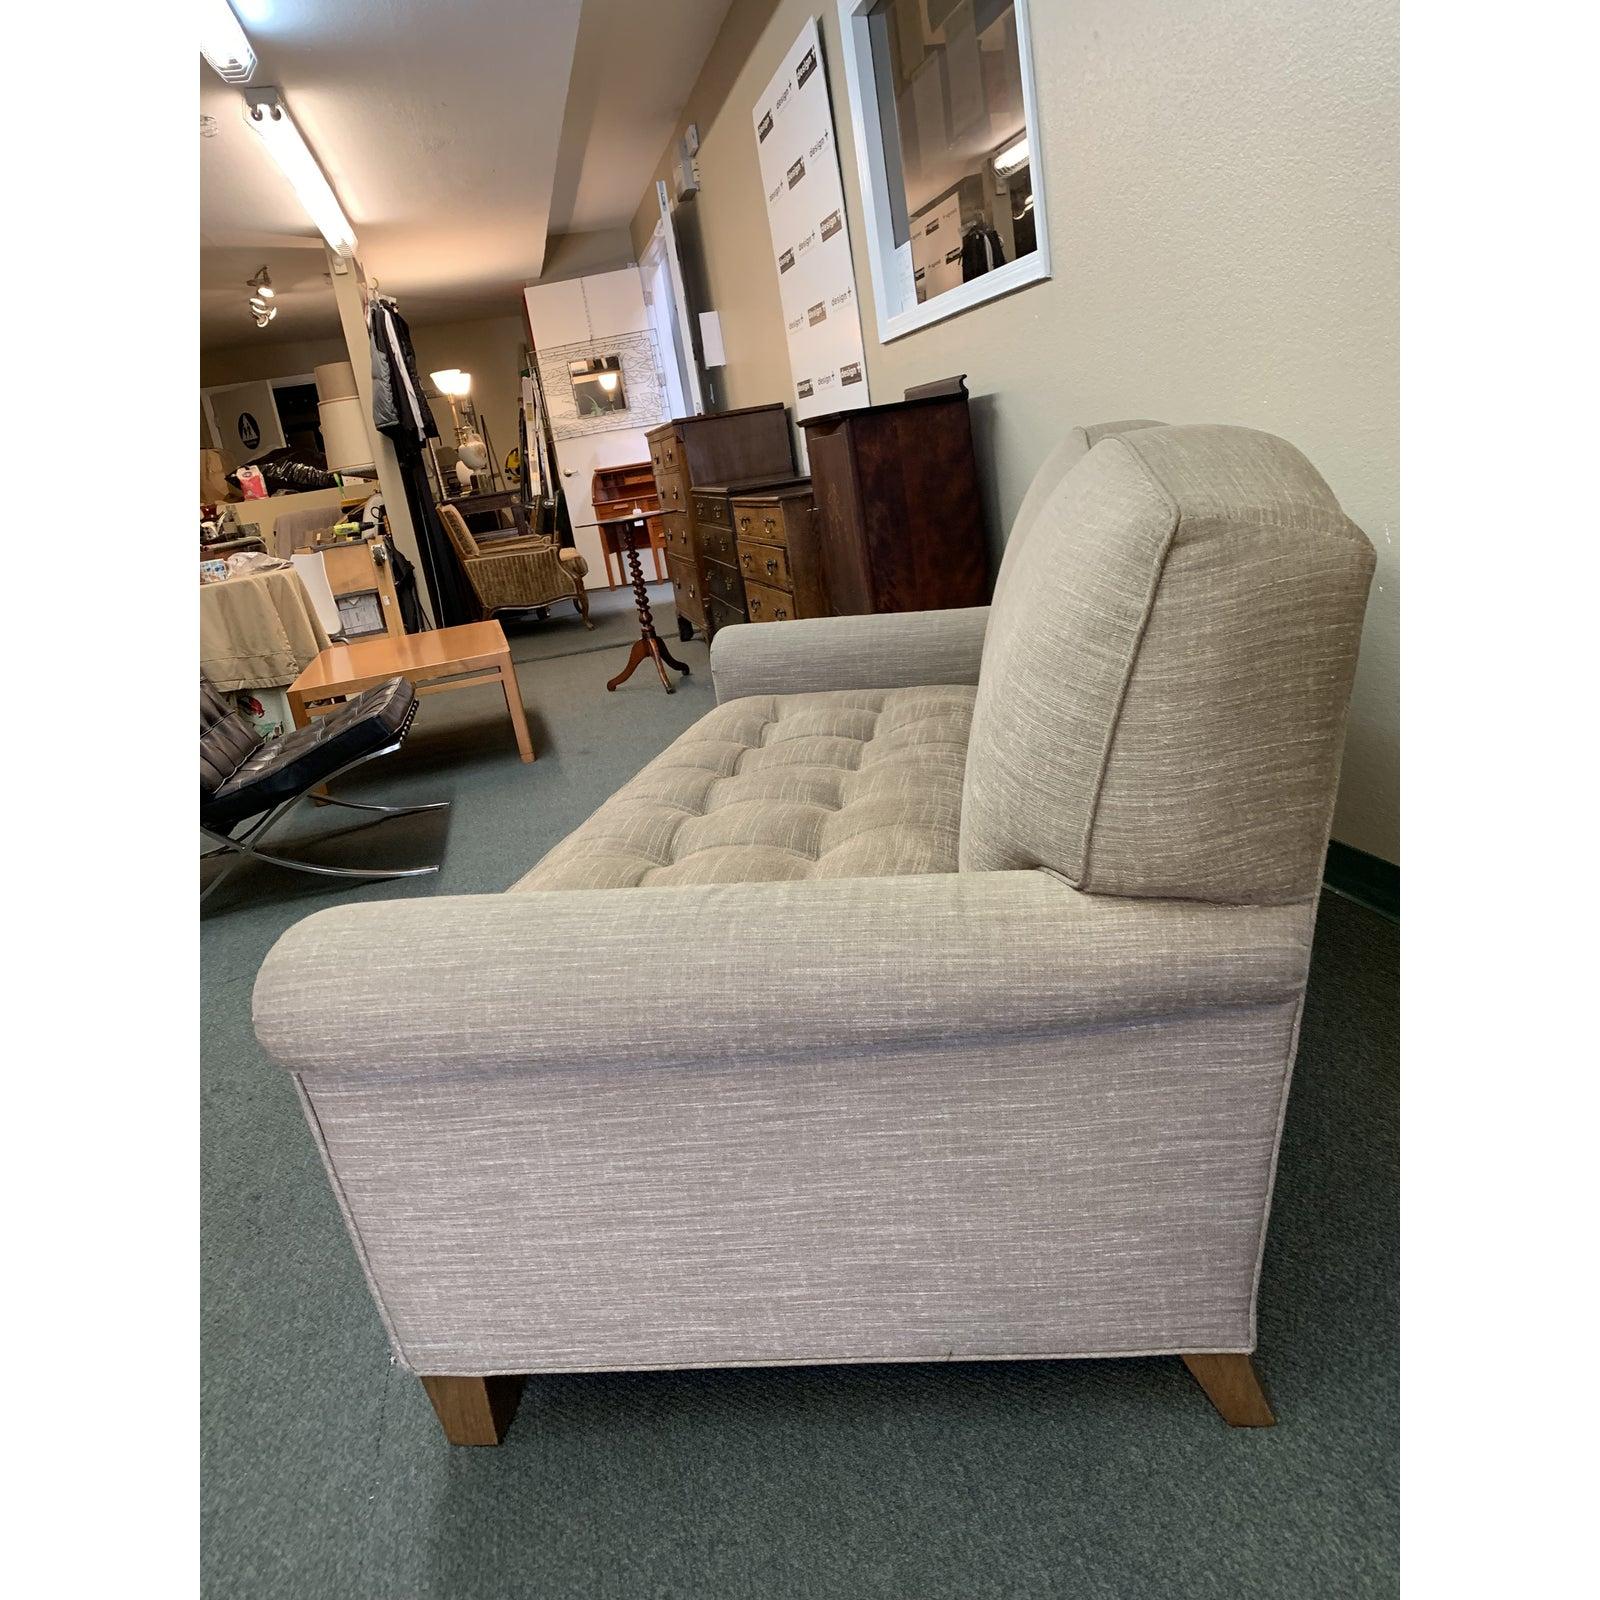 Design Plus Gallery presents a classic loveseat by A. Rudin. The softly curved back and rolled arms offer a casual elegance, a pair of textured fabrics offer a bit of surprise. Tufts in the down-wrapped bench cushion are buttonless. Tapered